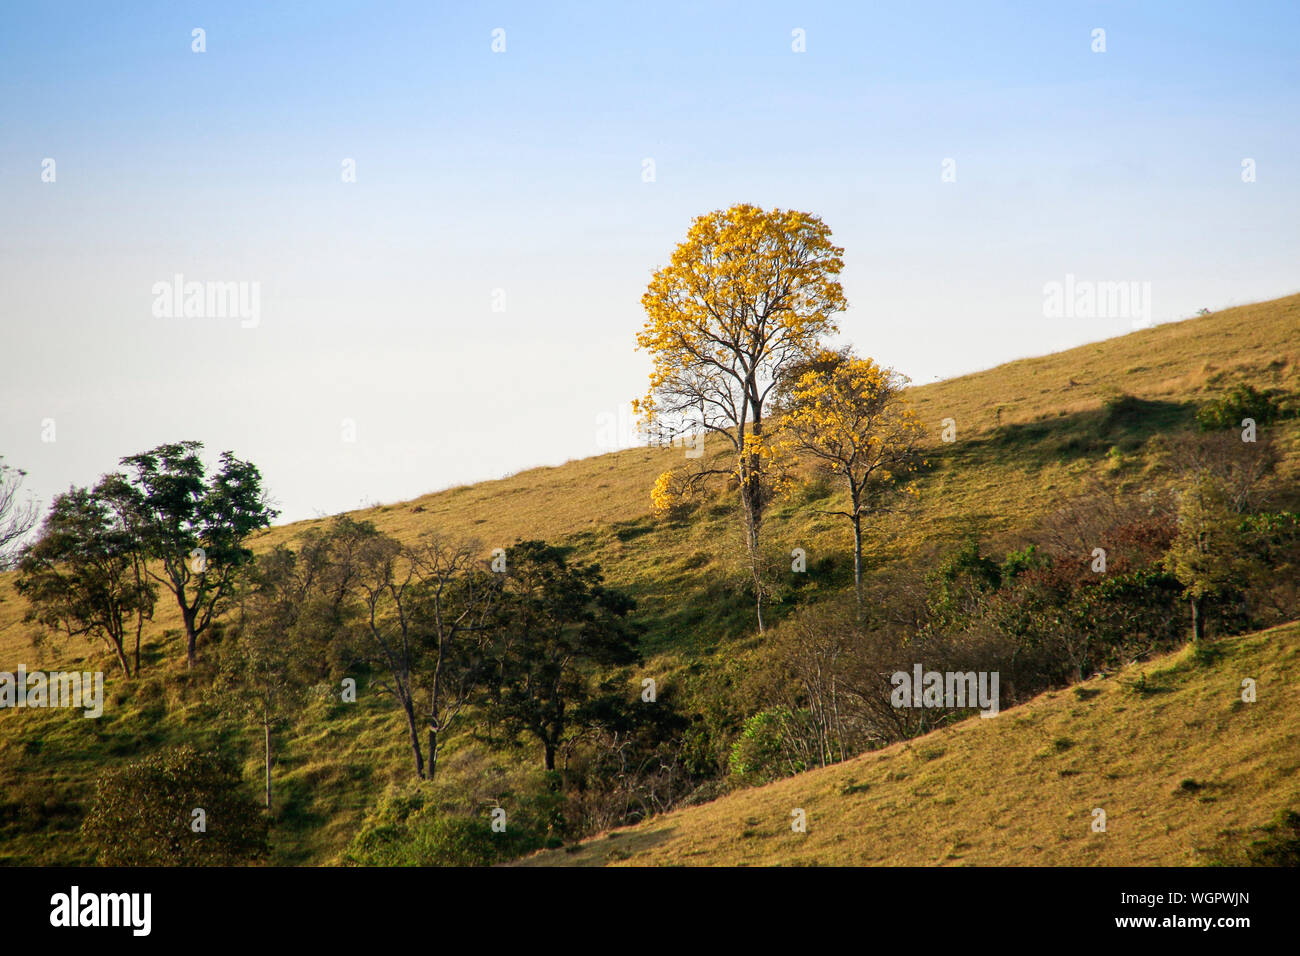 Flowering yellow ipe tree in the countryside, yellow tree in nature Stock Photo